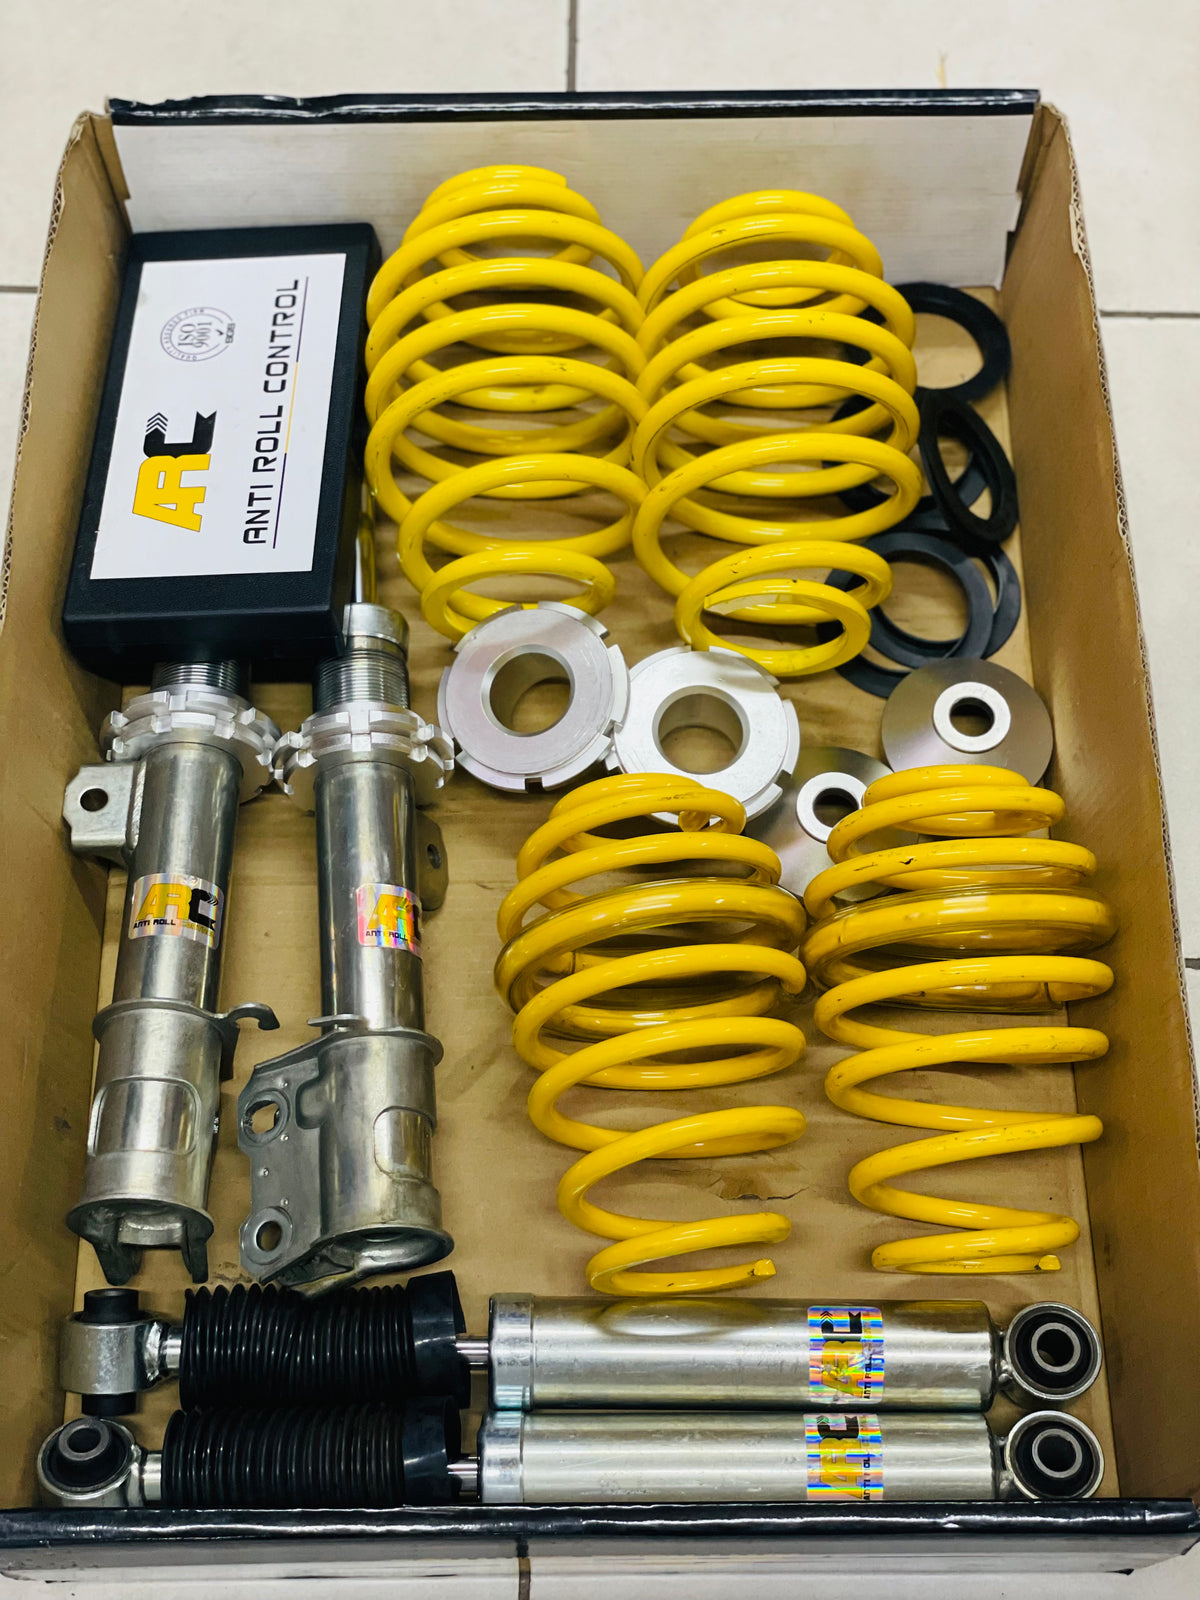 ARC COILOVERS FOR CORSA/CHEV UTILITY BAKKIE PREOWNED COILOVERS